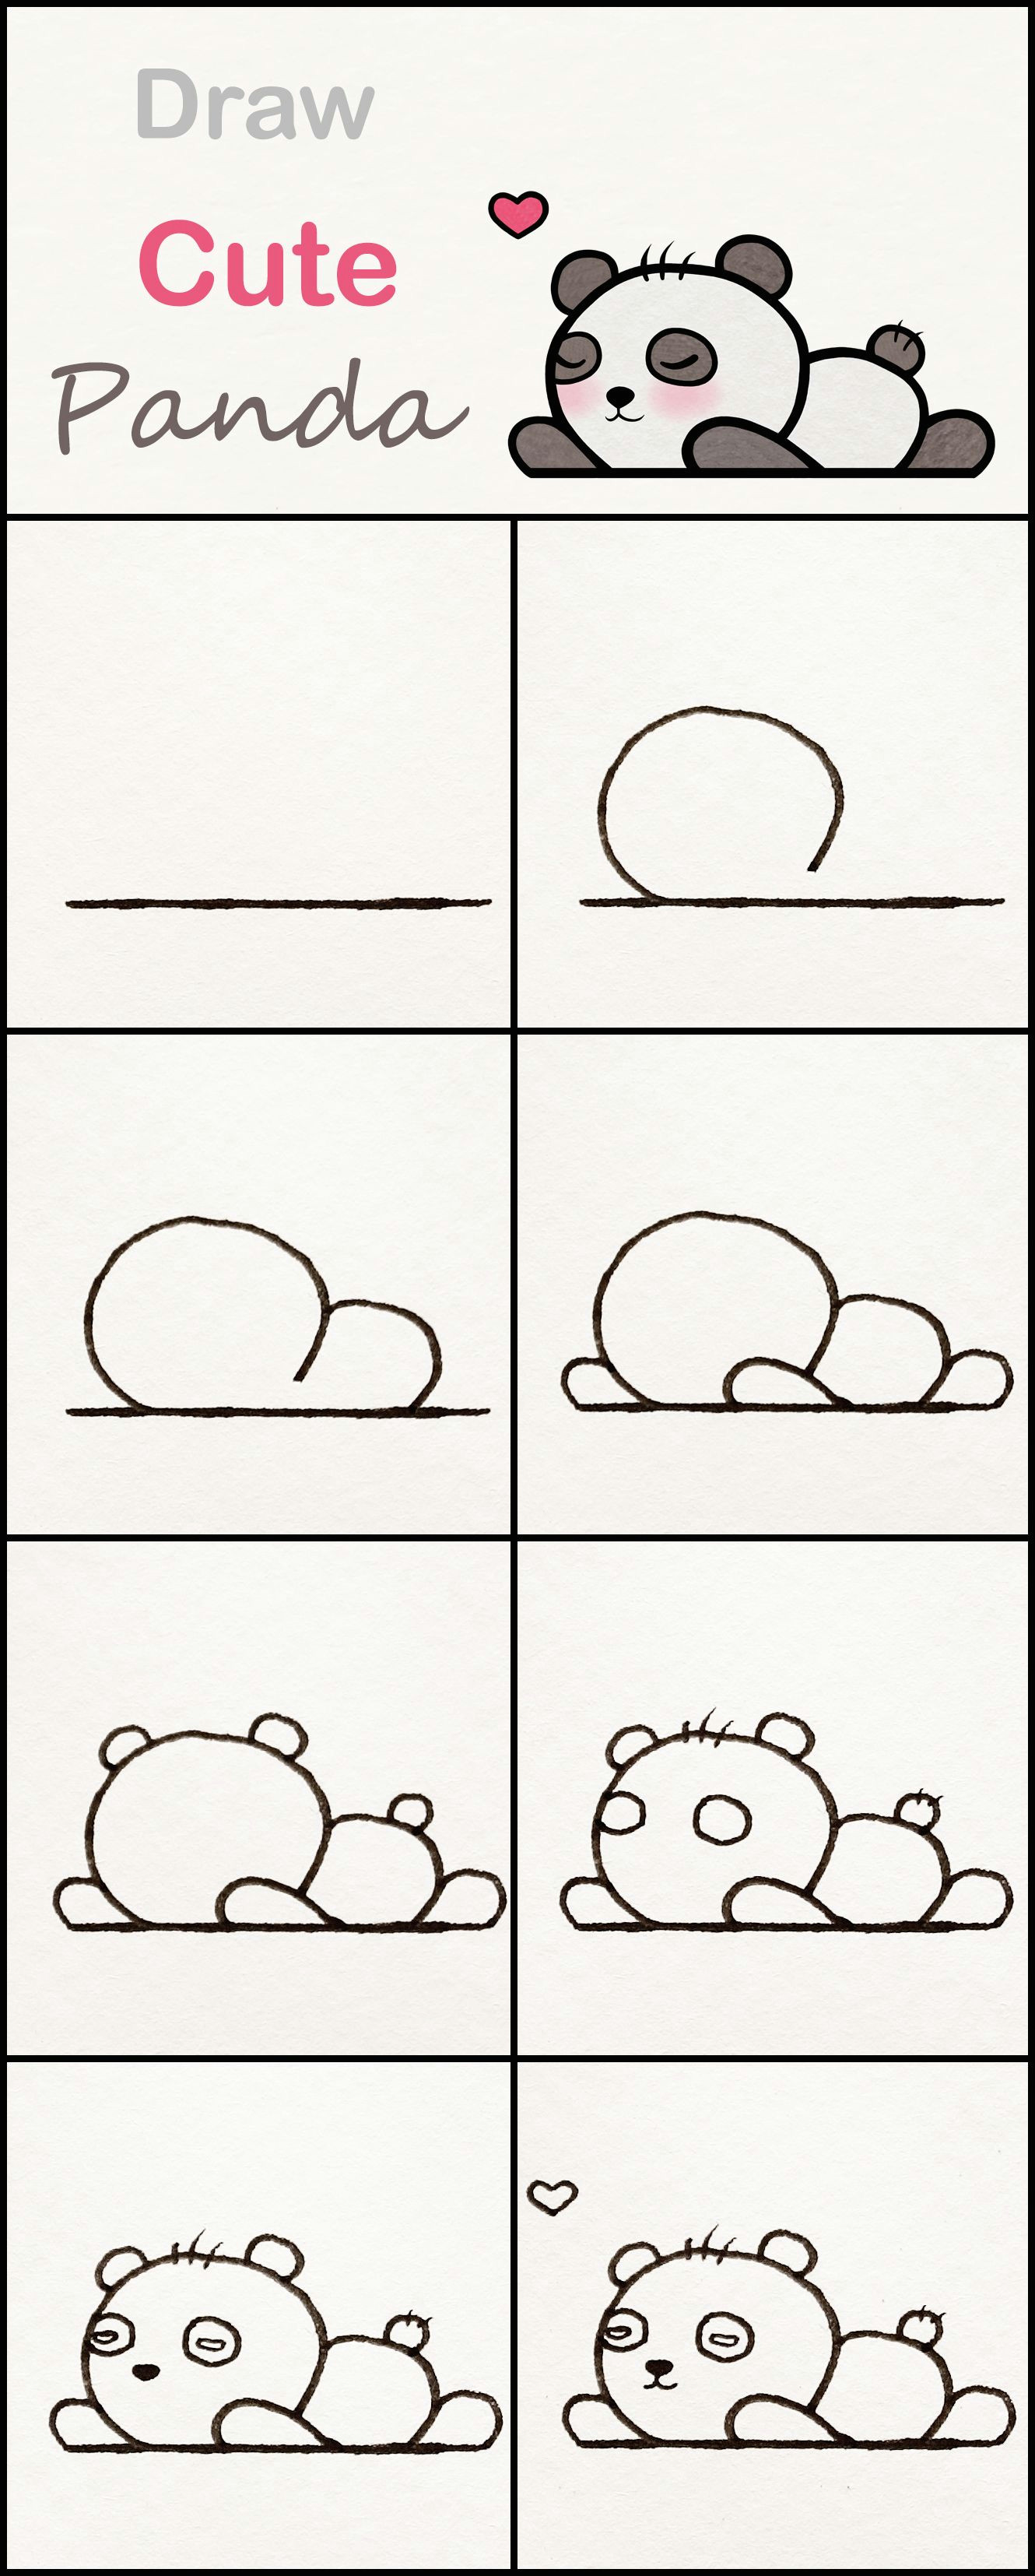 Easy Kawaii Drawings Step by Step Learn How to Draw A Cute Baby Panda Step by Step A Very Simple